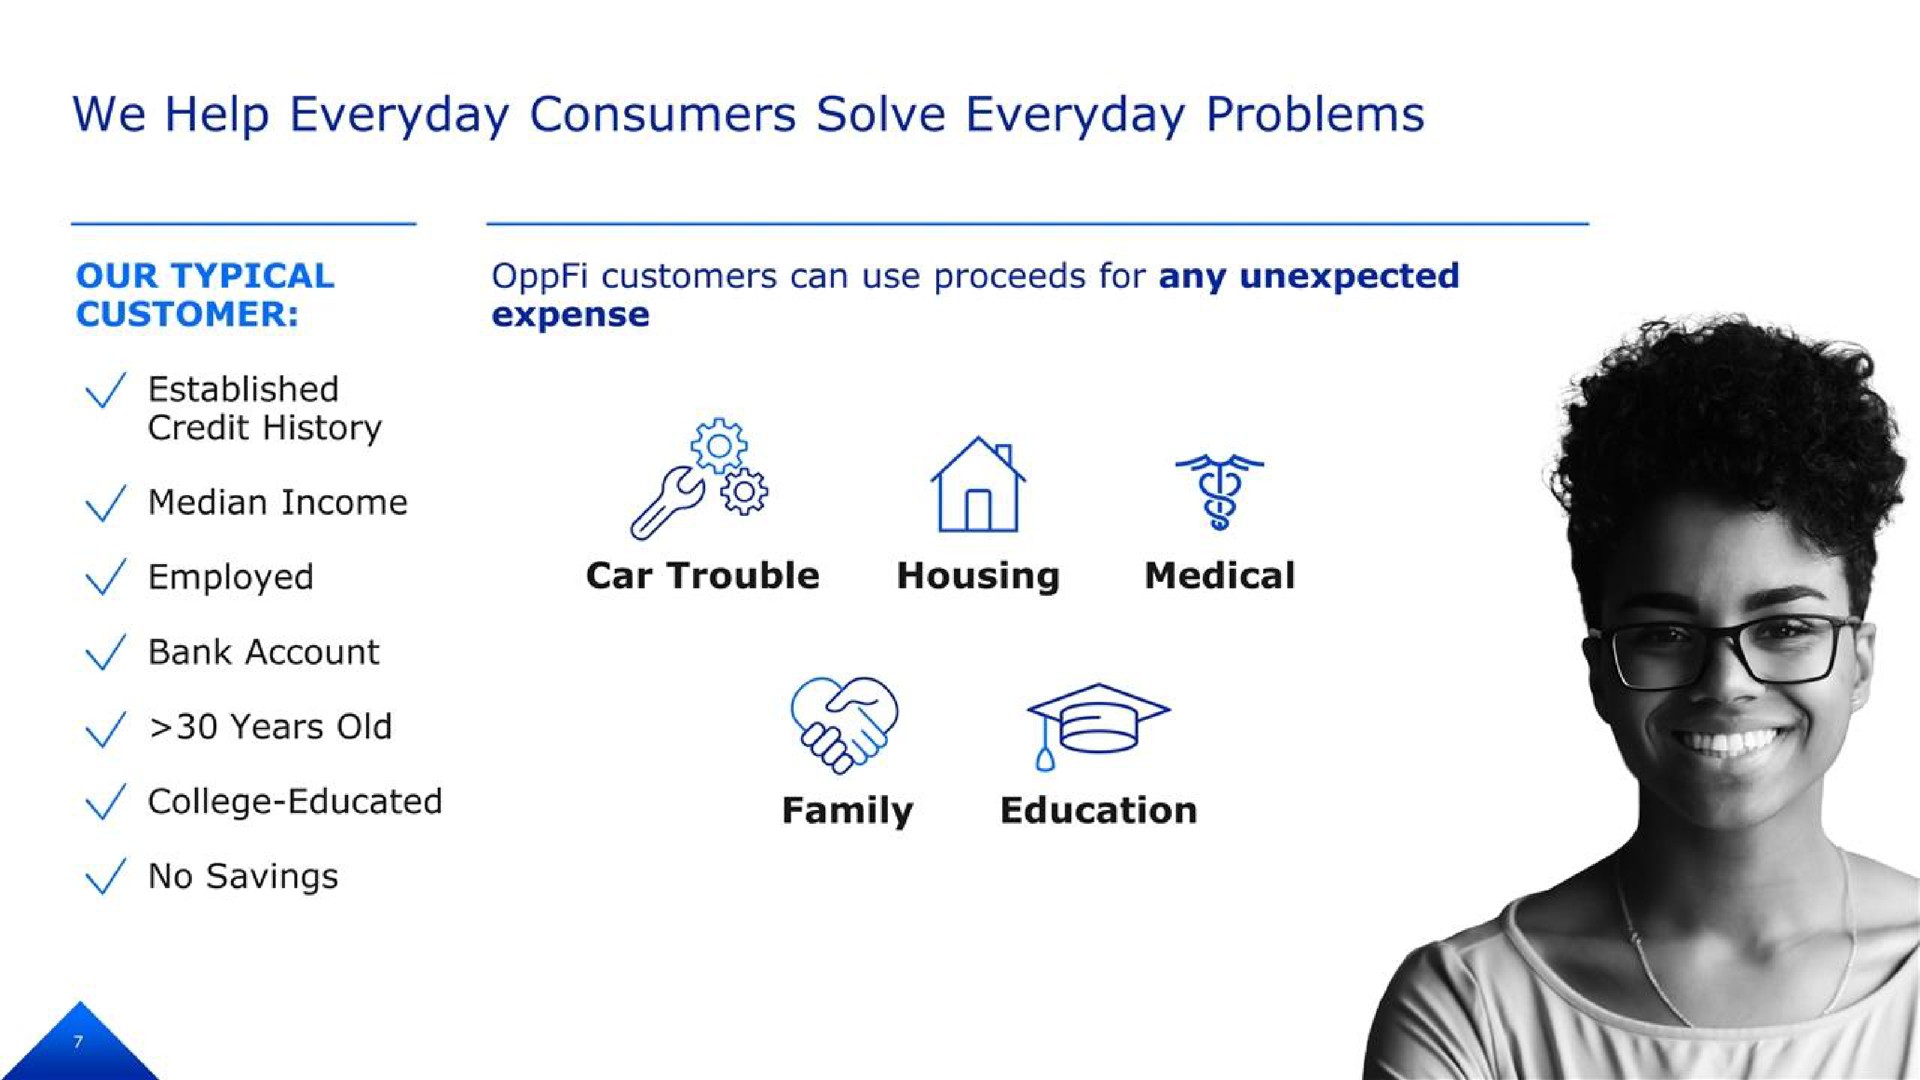 we help everyday consumers solve everyday problems college educated education family | OppFi